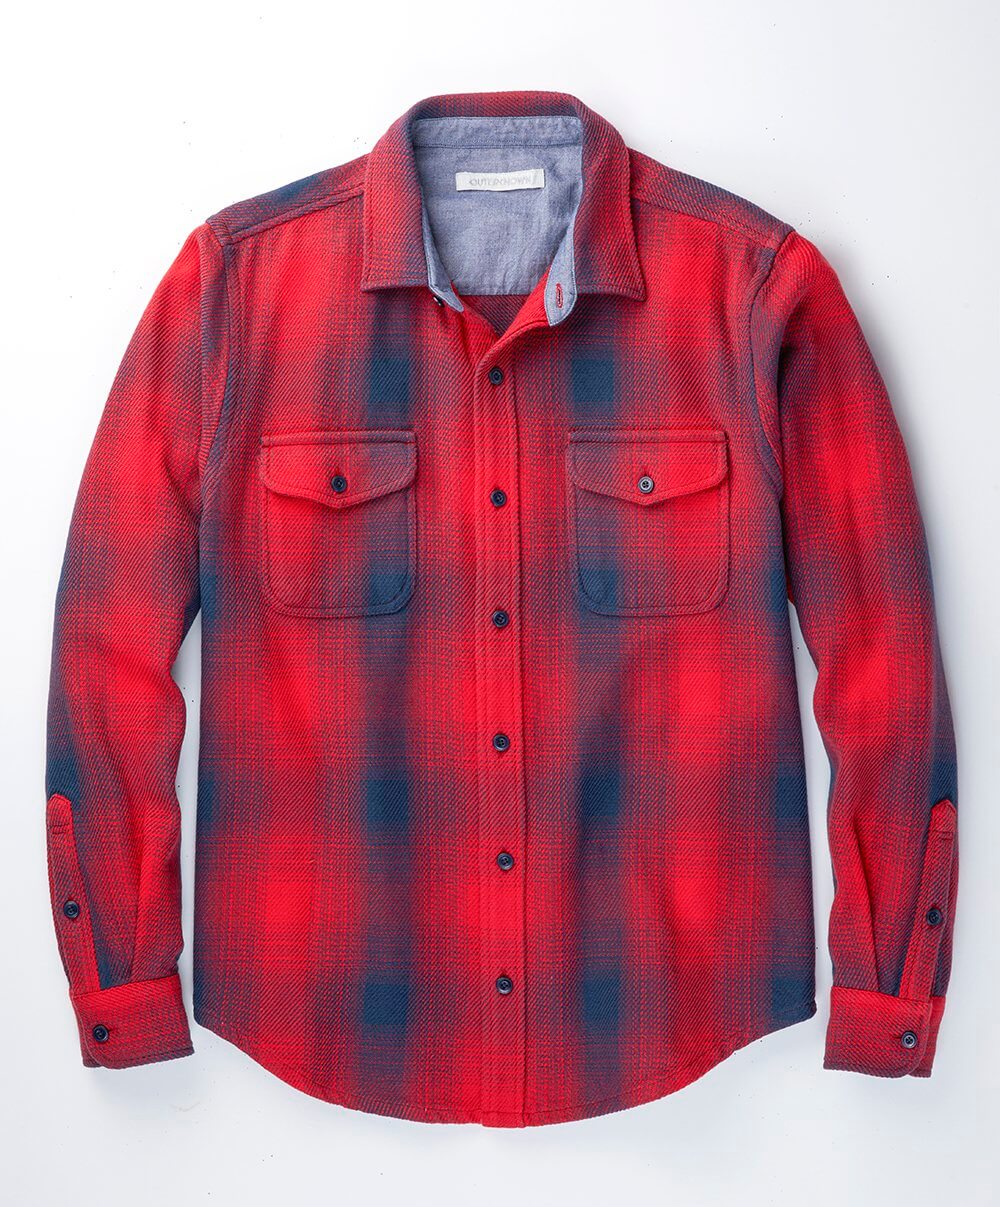 Outerknown - Blanket Shirt - Safety Red Overlook Plaid